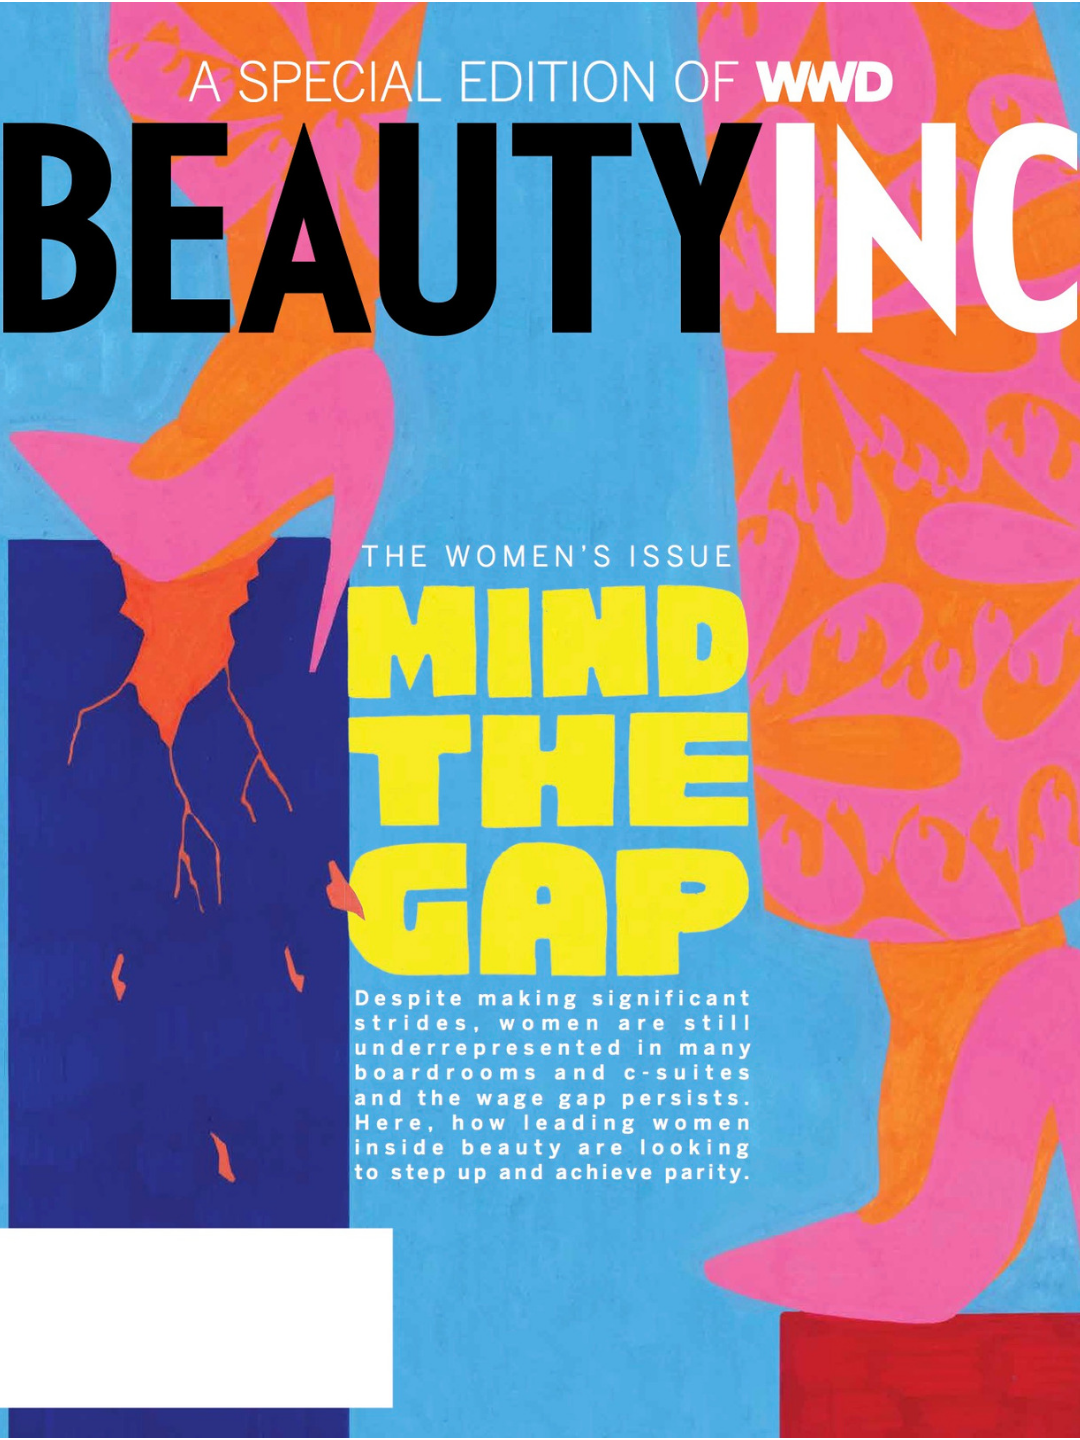 WWD Beauty Inc Issue October 2018, page 36